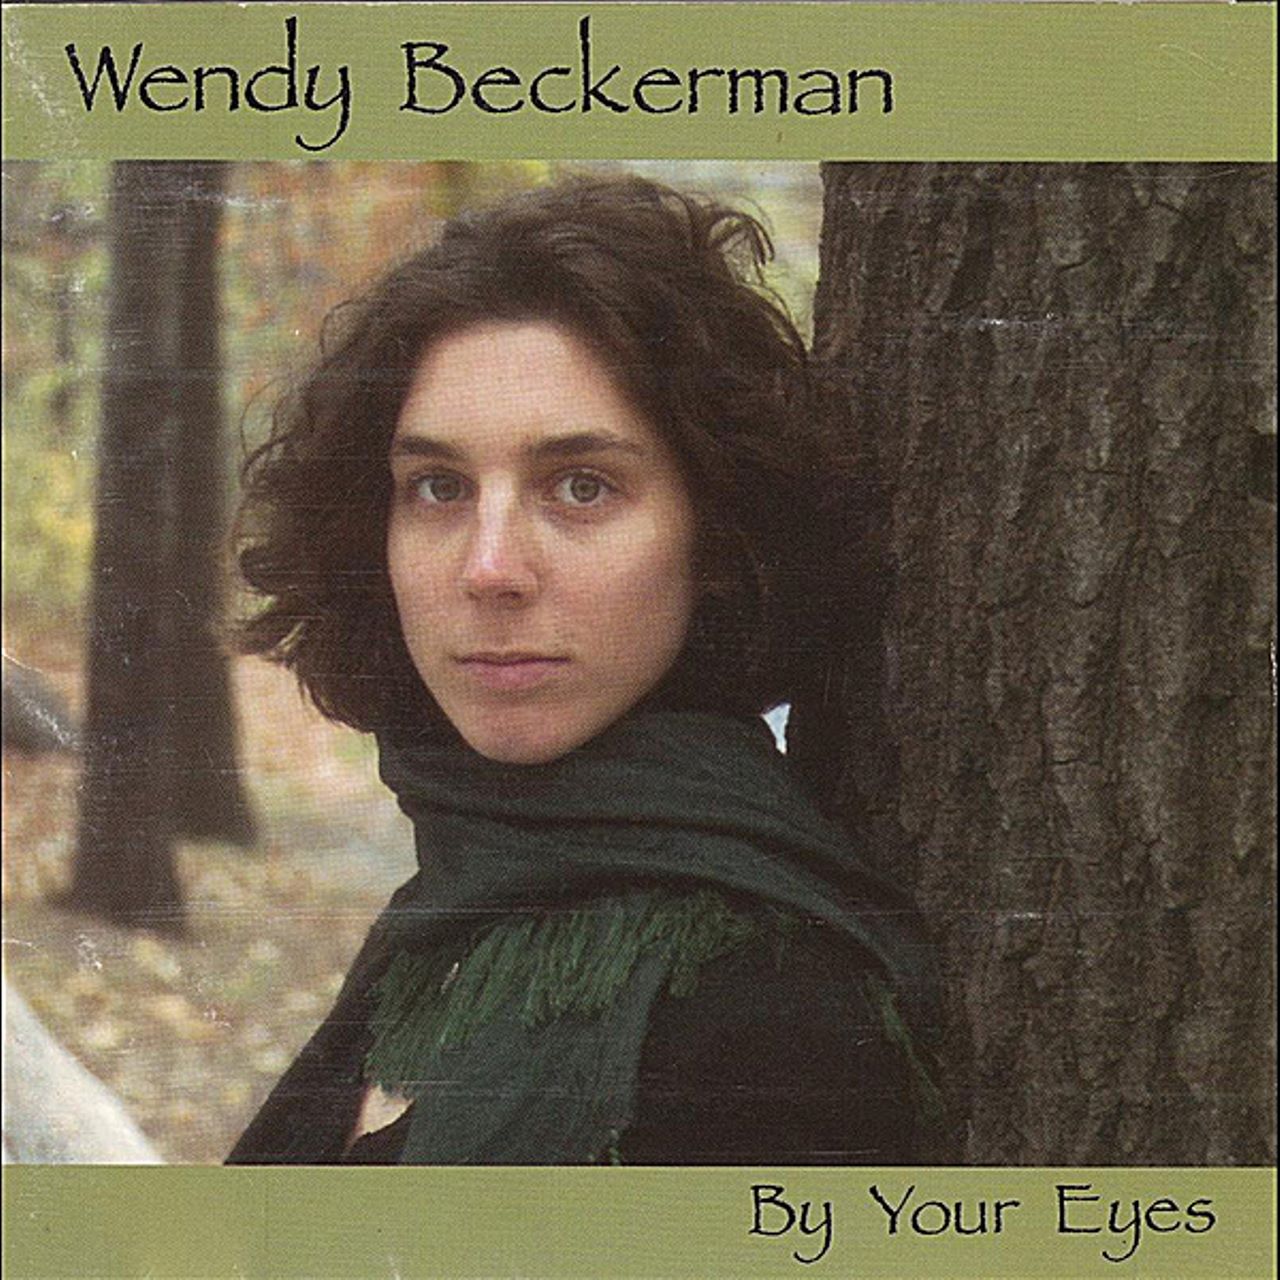 Wendy Beckerman - By Your Eyes cover album